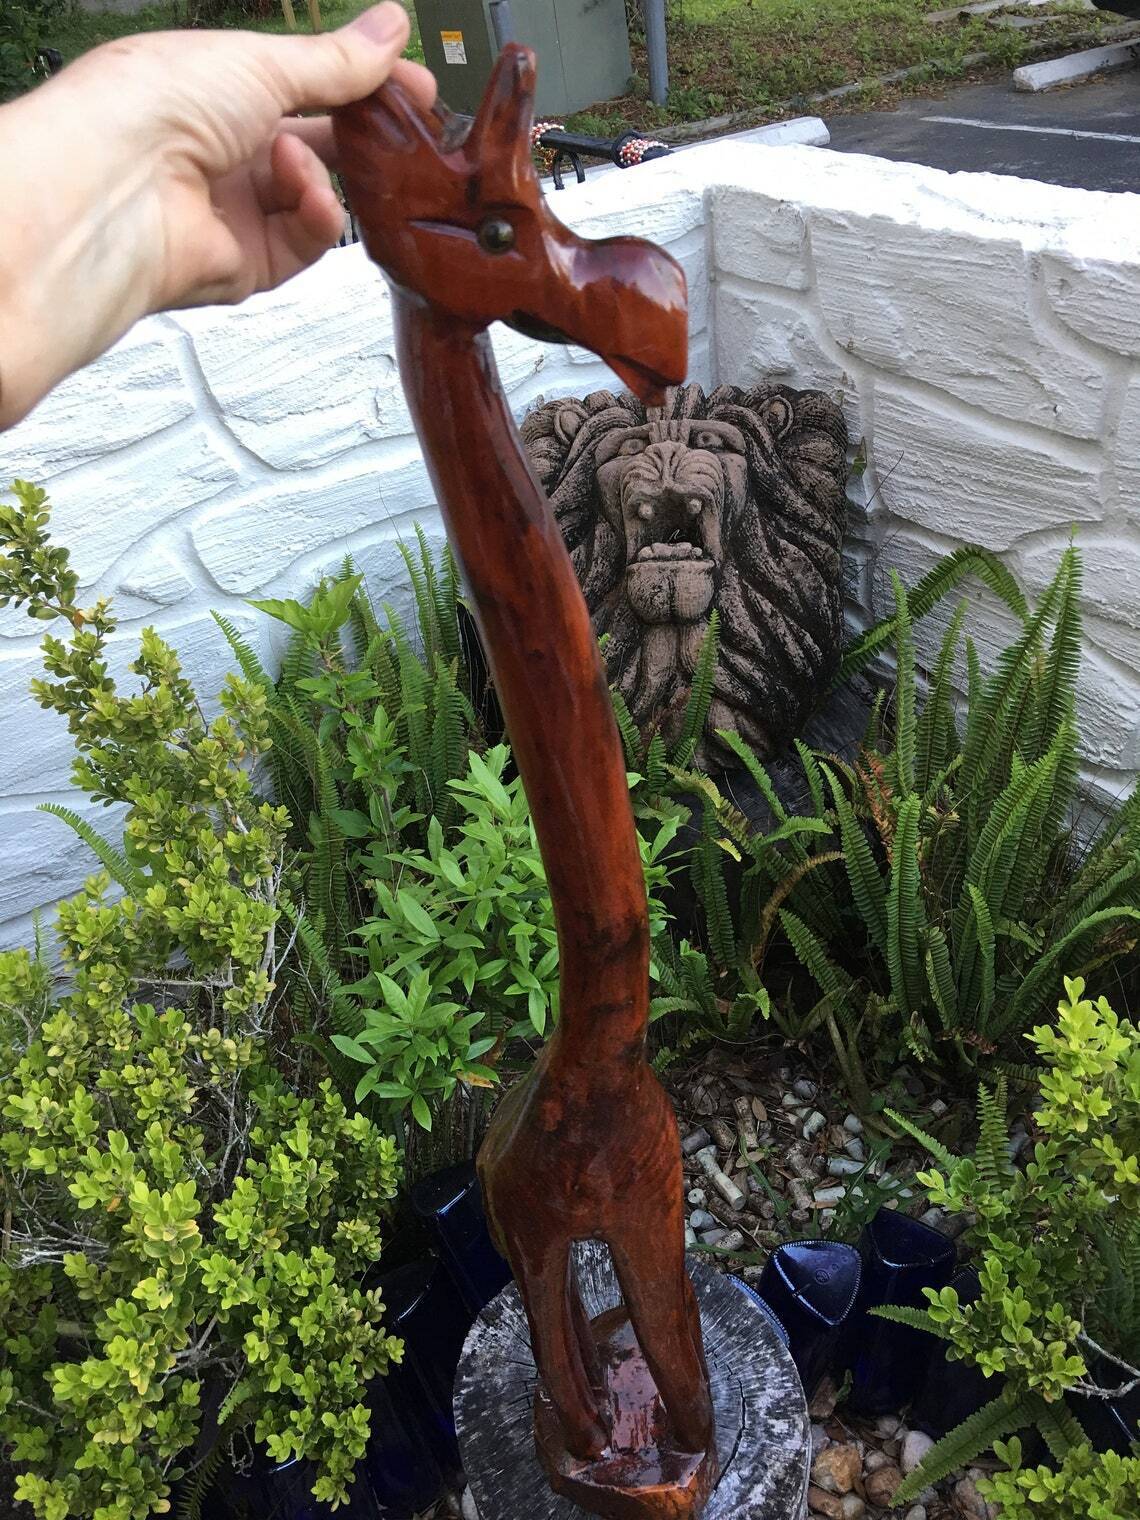 Shiny Wooden Giraffe without Spots